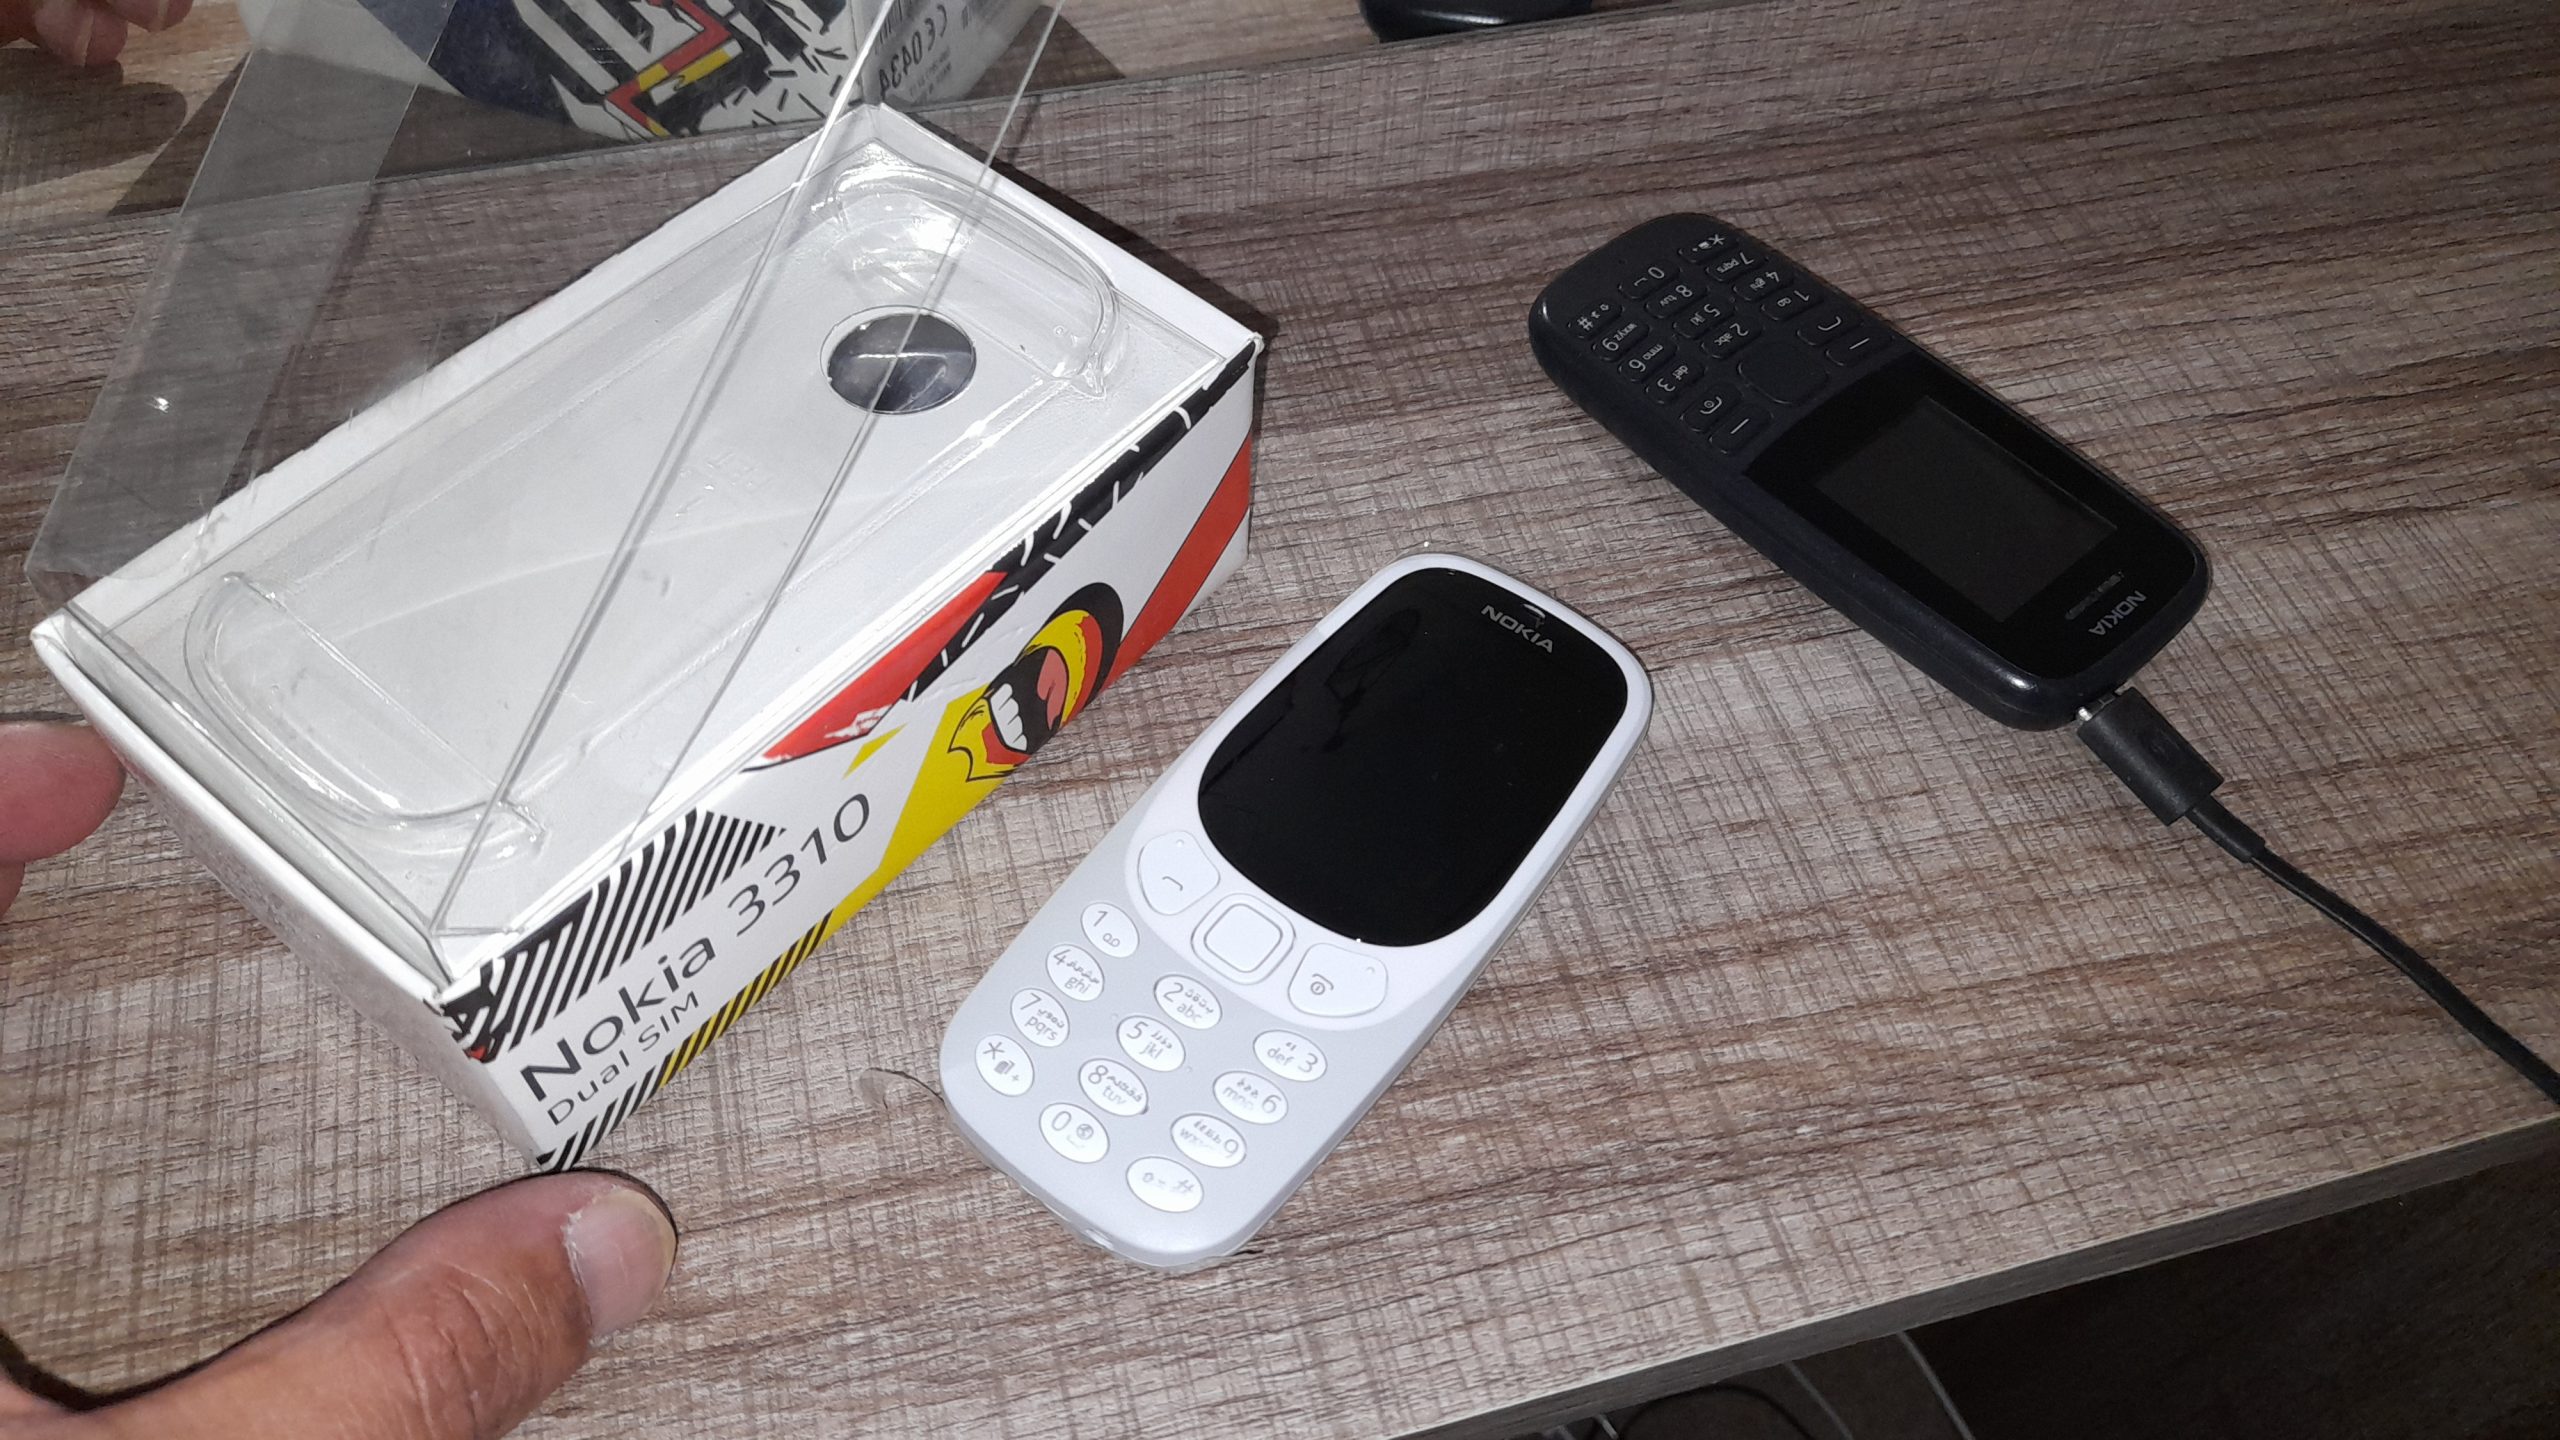 Nokia 3310 for sale – Brand New